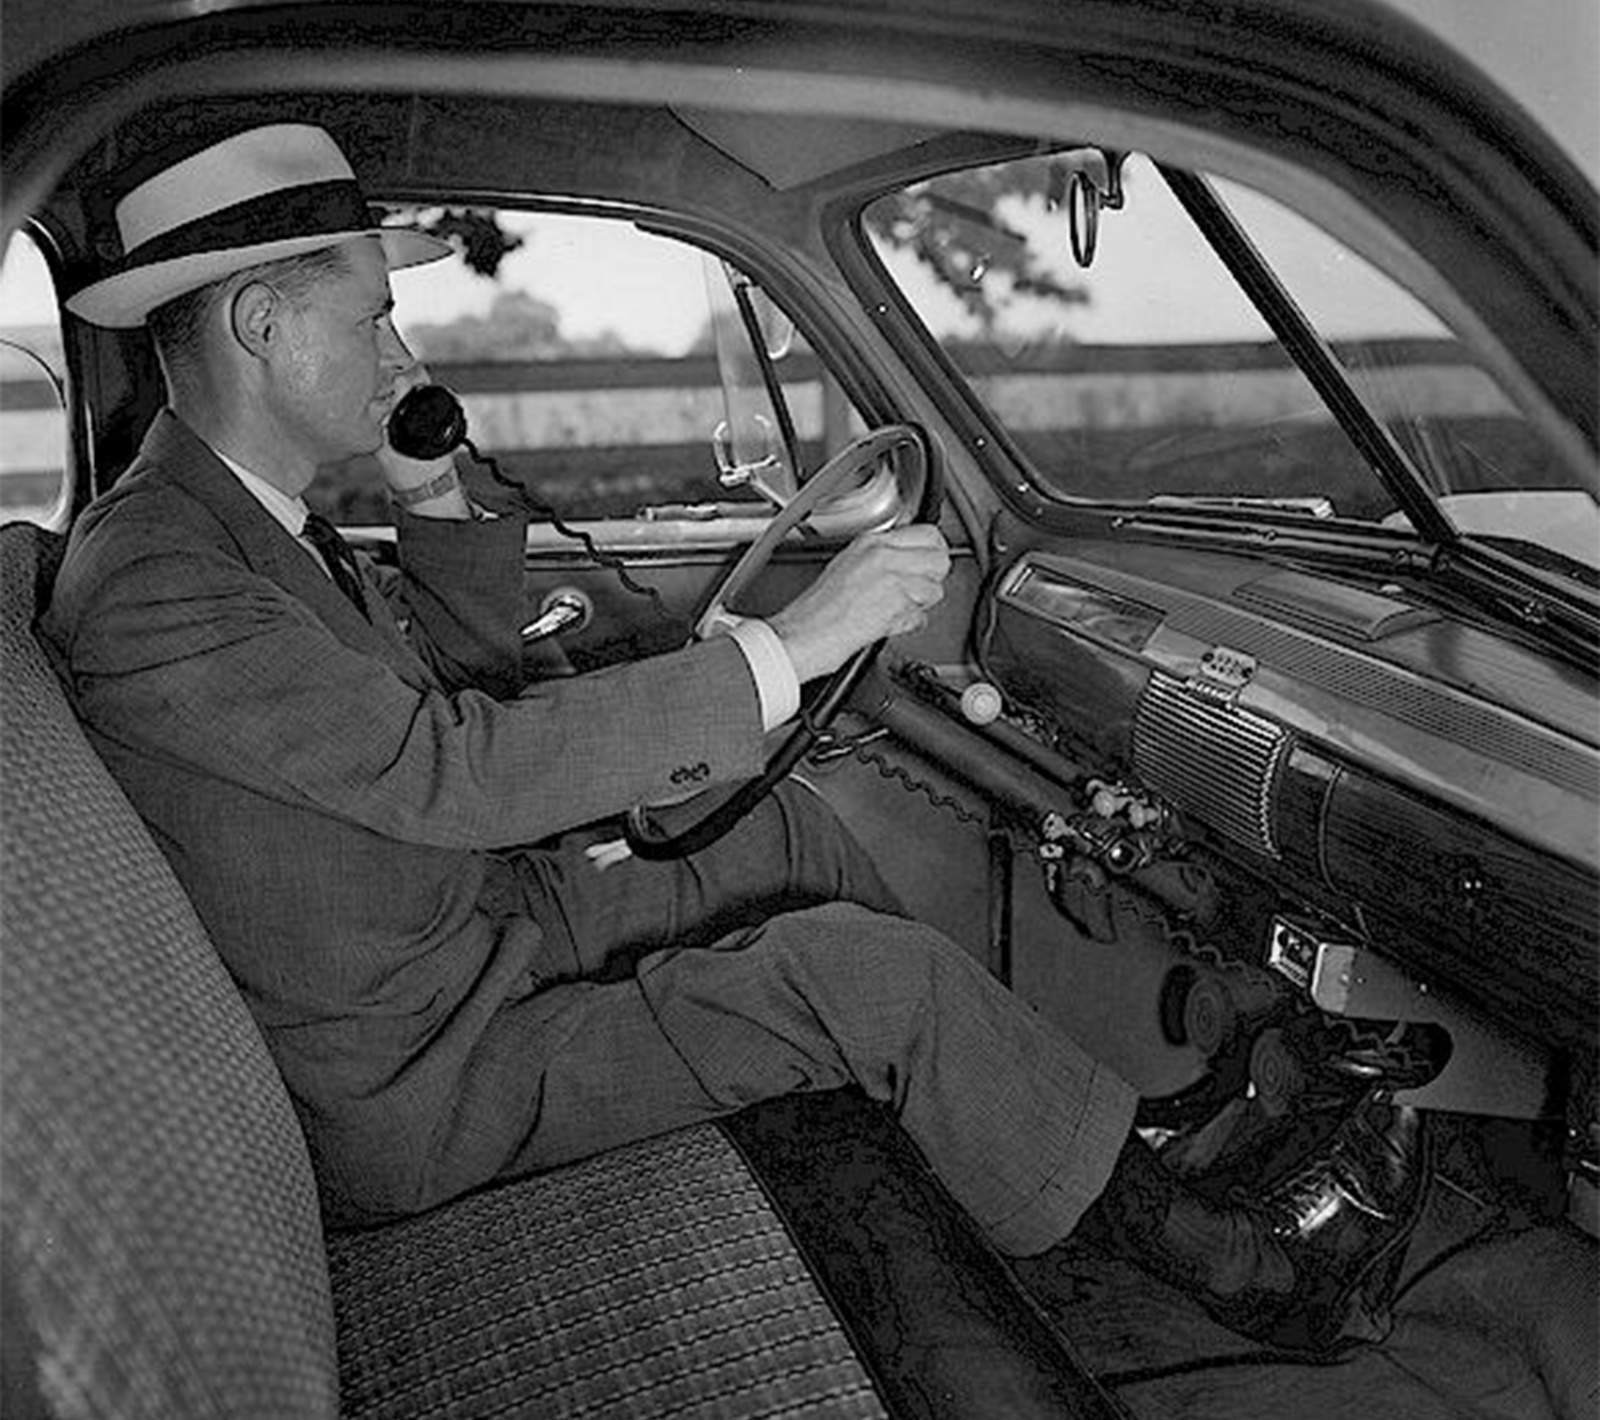 The first mobile phones were car phones. Call quality was superb (if you could get a channel).